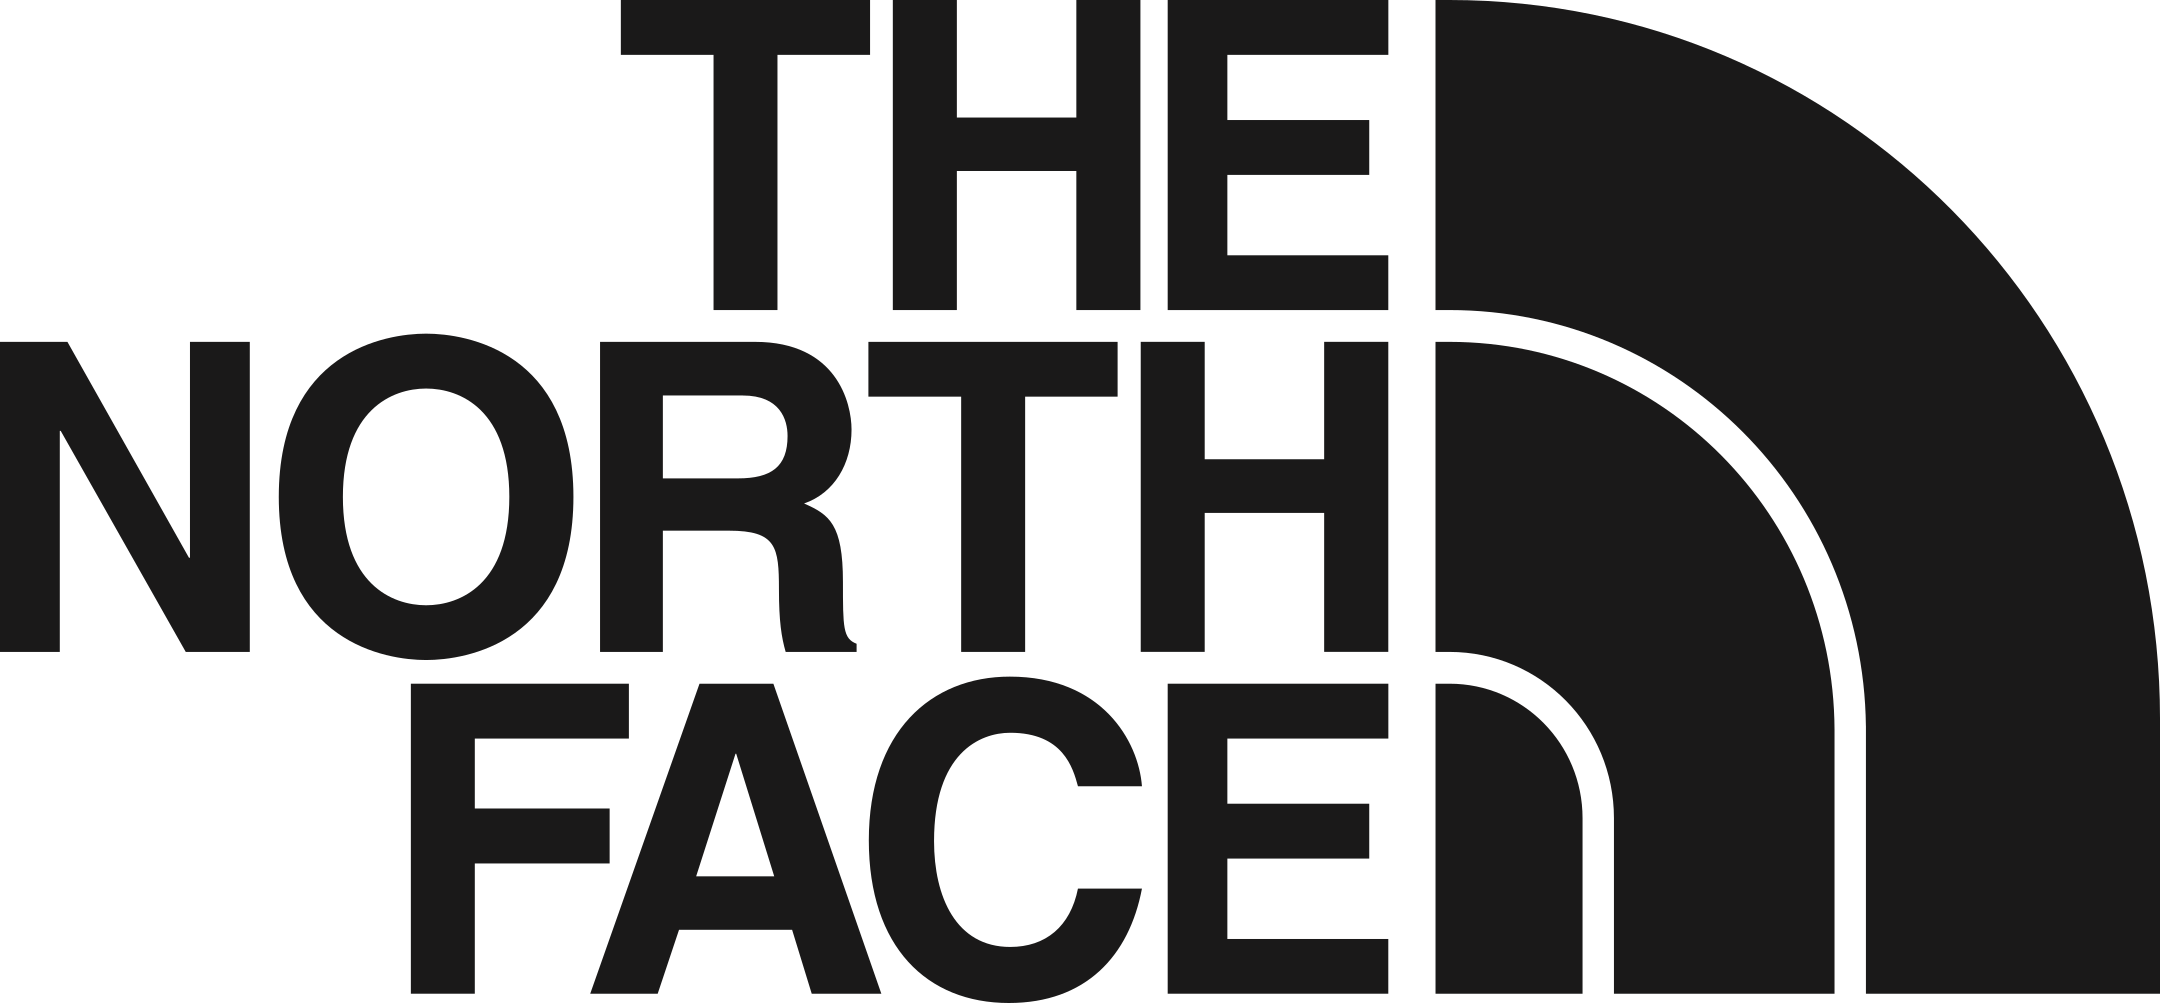 the north face logo 1 - The North Face Logo